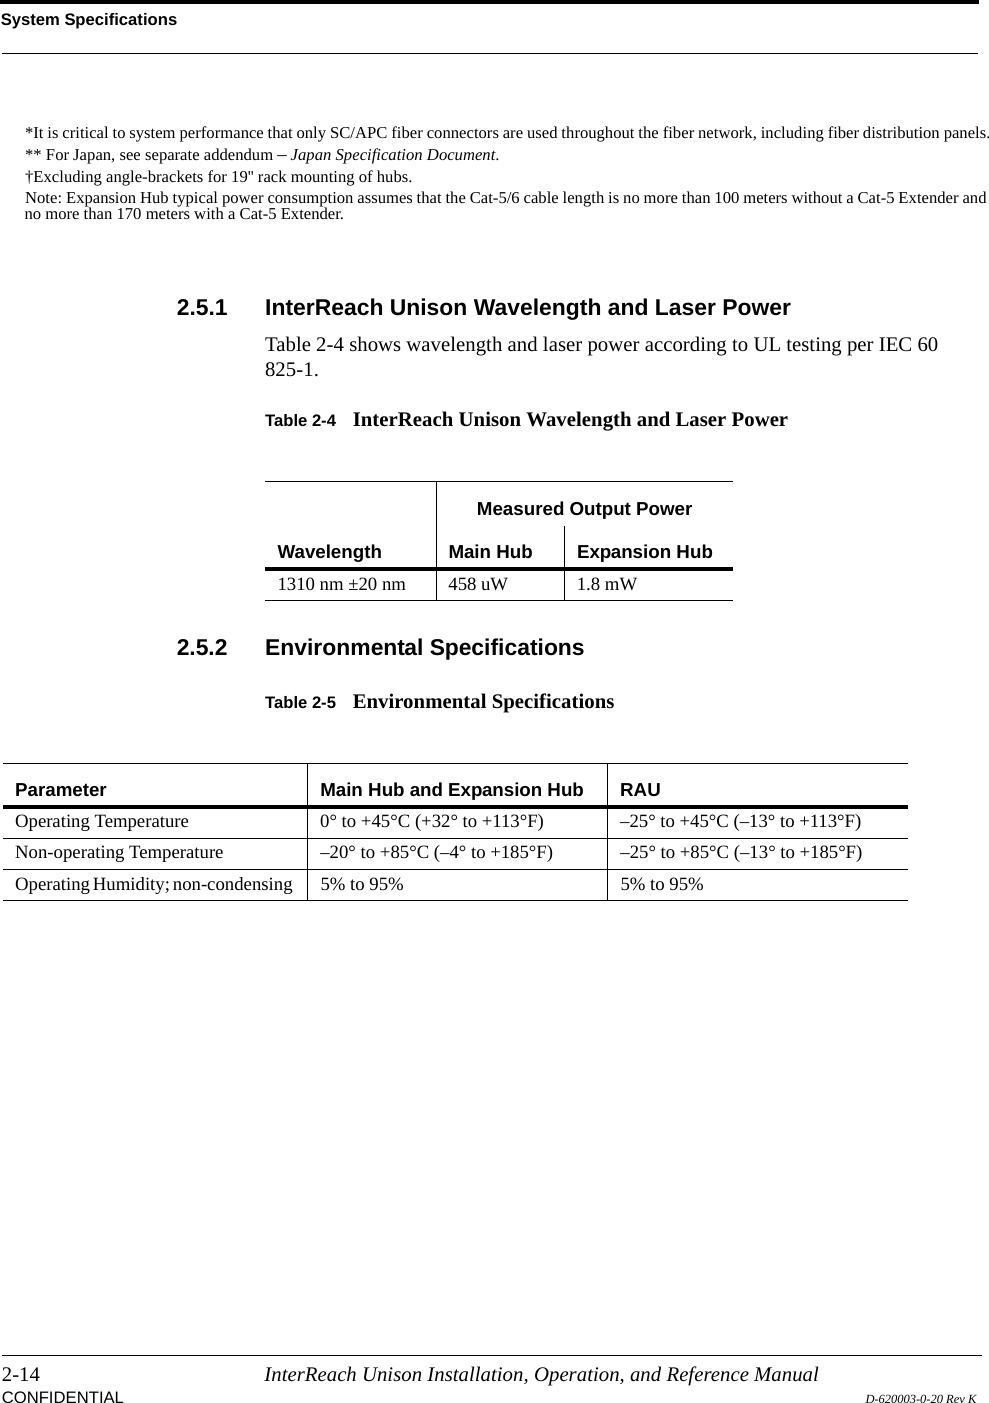 System Specifications2-14 InterReach Unison Installation, Operation, and Reference ManualCONFIDENTIAL D-620003-0-20 Rev K2.5.1 InterReach Unison Wavelength and Laser PowerTable 2-4 shows wavelength and laser power according to UL testing per IEC 60 825-1.Table 2-4 InterReach Unison Wavelength and Laser Power2.5.2 Environmental SpecificationsTable 2-5 Environmental Specifications*It is critical to system performance that only SC/APC fiber connectors are used throughout the fiber network, including fiber distribution panels.** For Japan, see separate addendum – Japan Specification Document.†Excluding angle-brackets for 19&apos;&apos; rack mounting of hubs.Note: Expansion Hub typical power consumption assumes that the Cat-5/6 cable length is no more than 100 meters without a Cat-5 Extender and no more than 170 meters with a Cat-5 Extender.WavelengthMeasured Output PowerMain Hub Expansion Hub1310 nm ±20 nm 458 uW 1.8 mWParameter Main Hub and Expansion Hub RAUOperating Temperature  0° to +45°C (+32° to +113°F) –25° to +45°C (–13° to +113°F)Non-operating Temperature  –20° to +85°C (–4° to +185°F) –25° to +85°C (–13° to +185°F)Operating Humidity; non-condensing  5% to 95% 5% to 95%